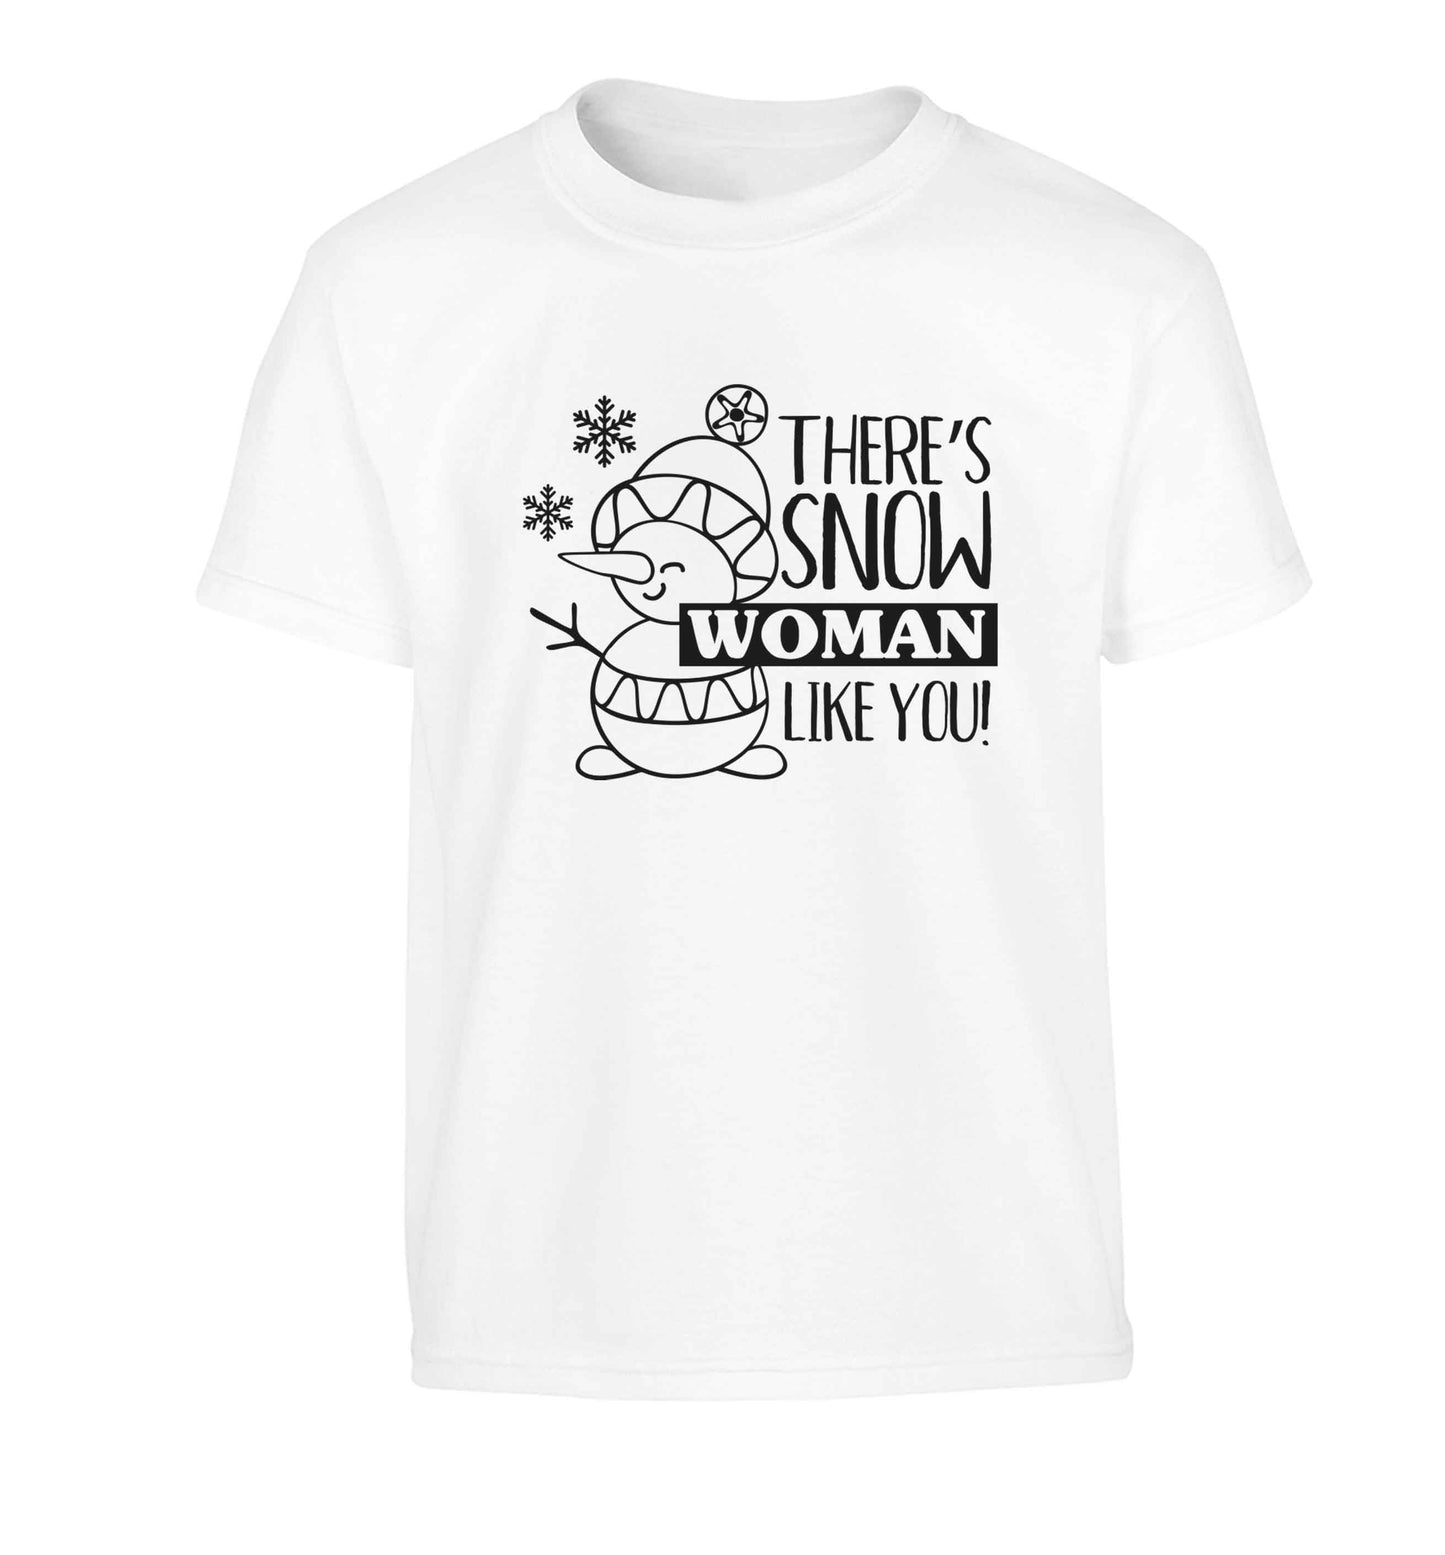 There's snow woman like you Children's white Tshirt 12-13 Years